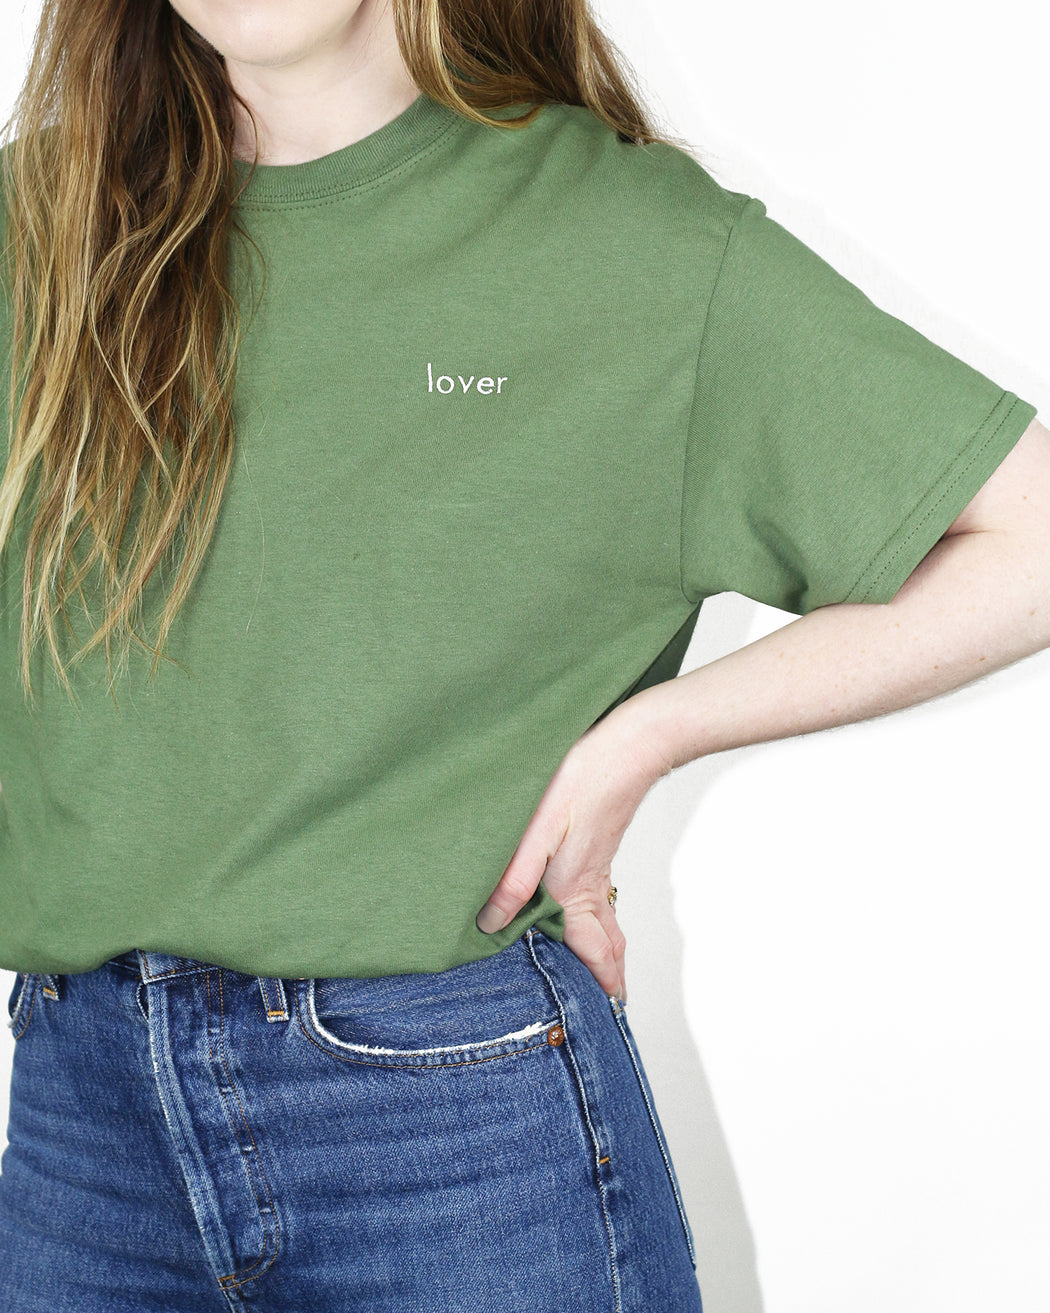 Double Trouble Gang:Lover Tee – White on Green Embroidery,ANOMIE